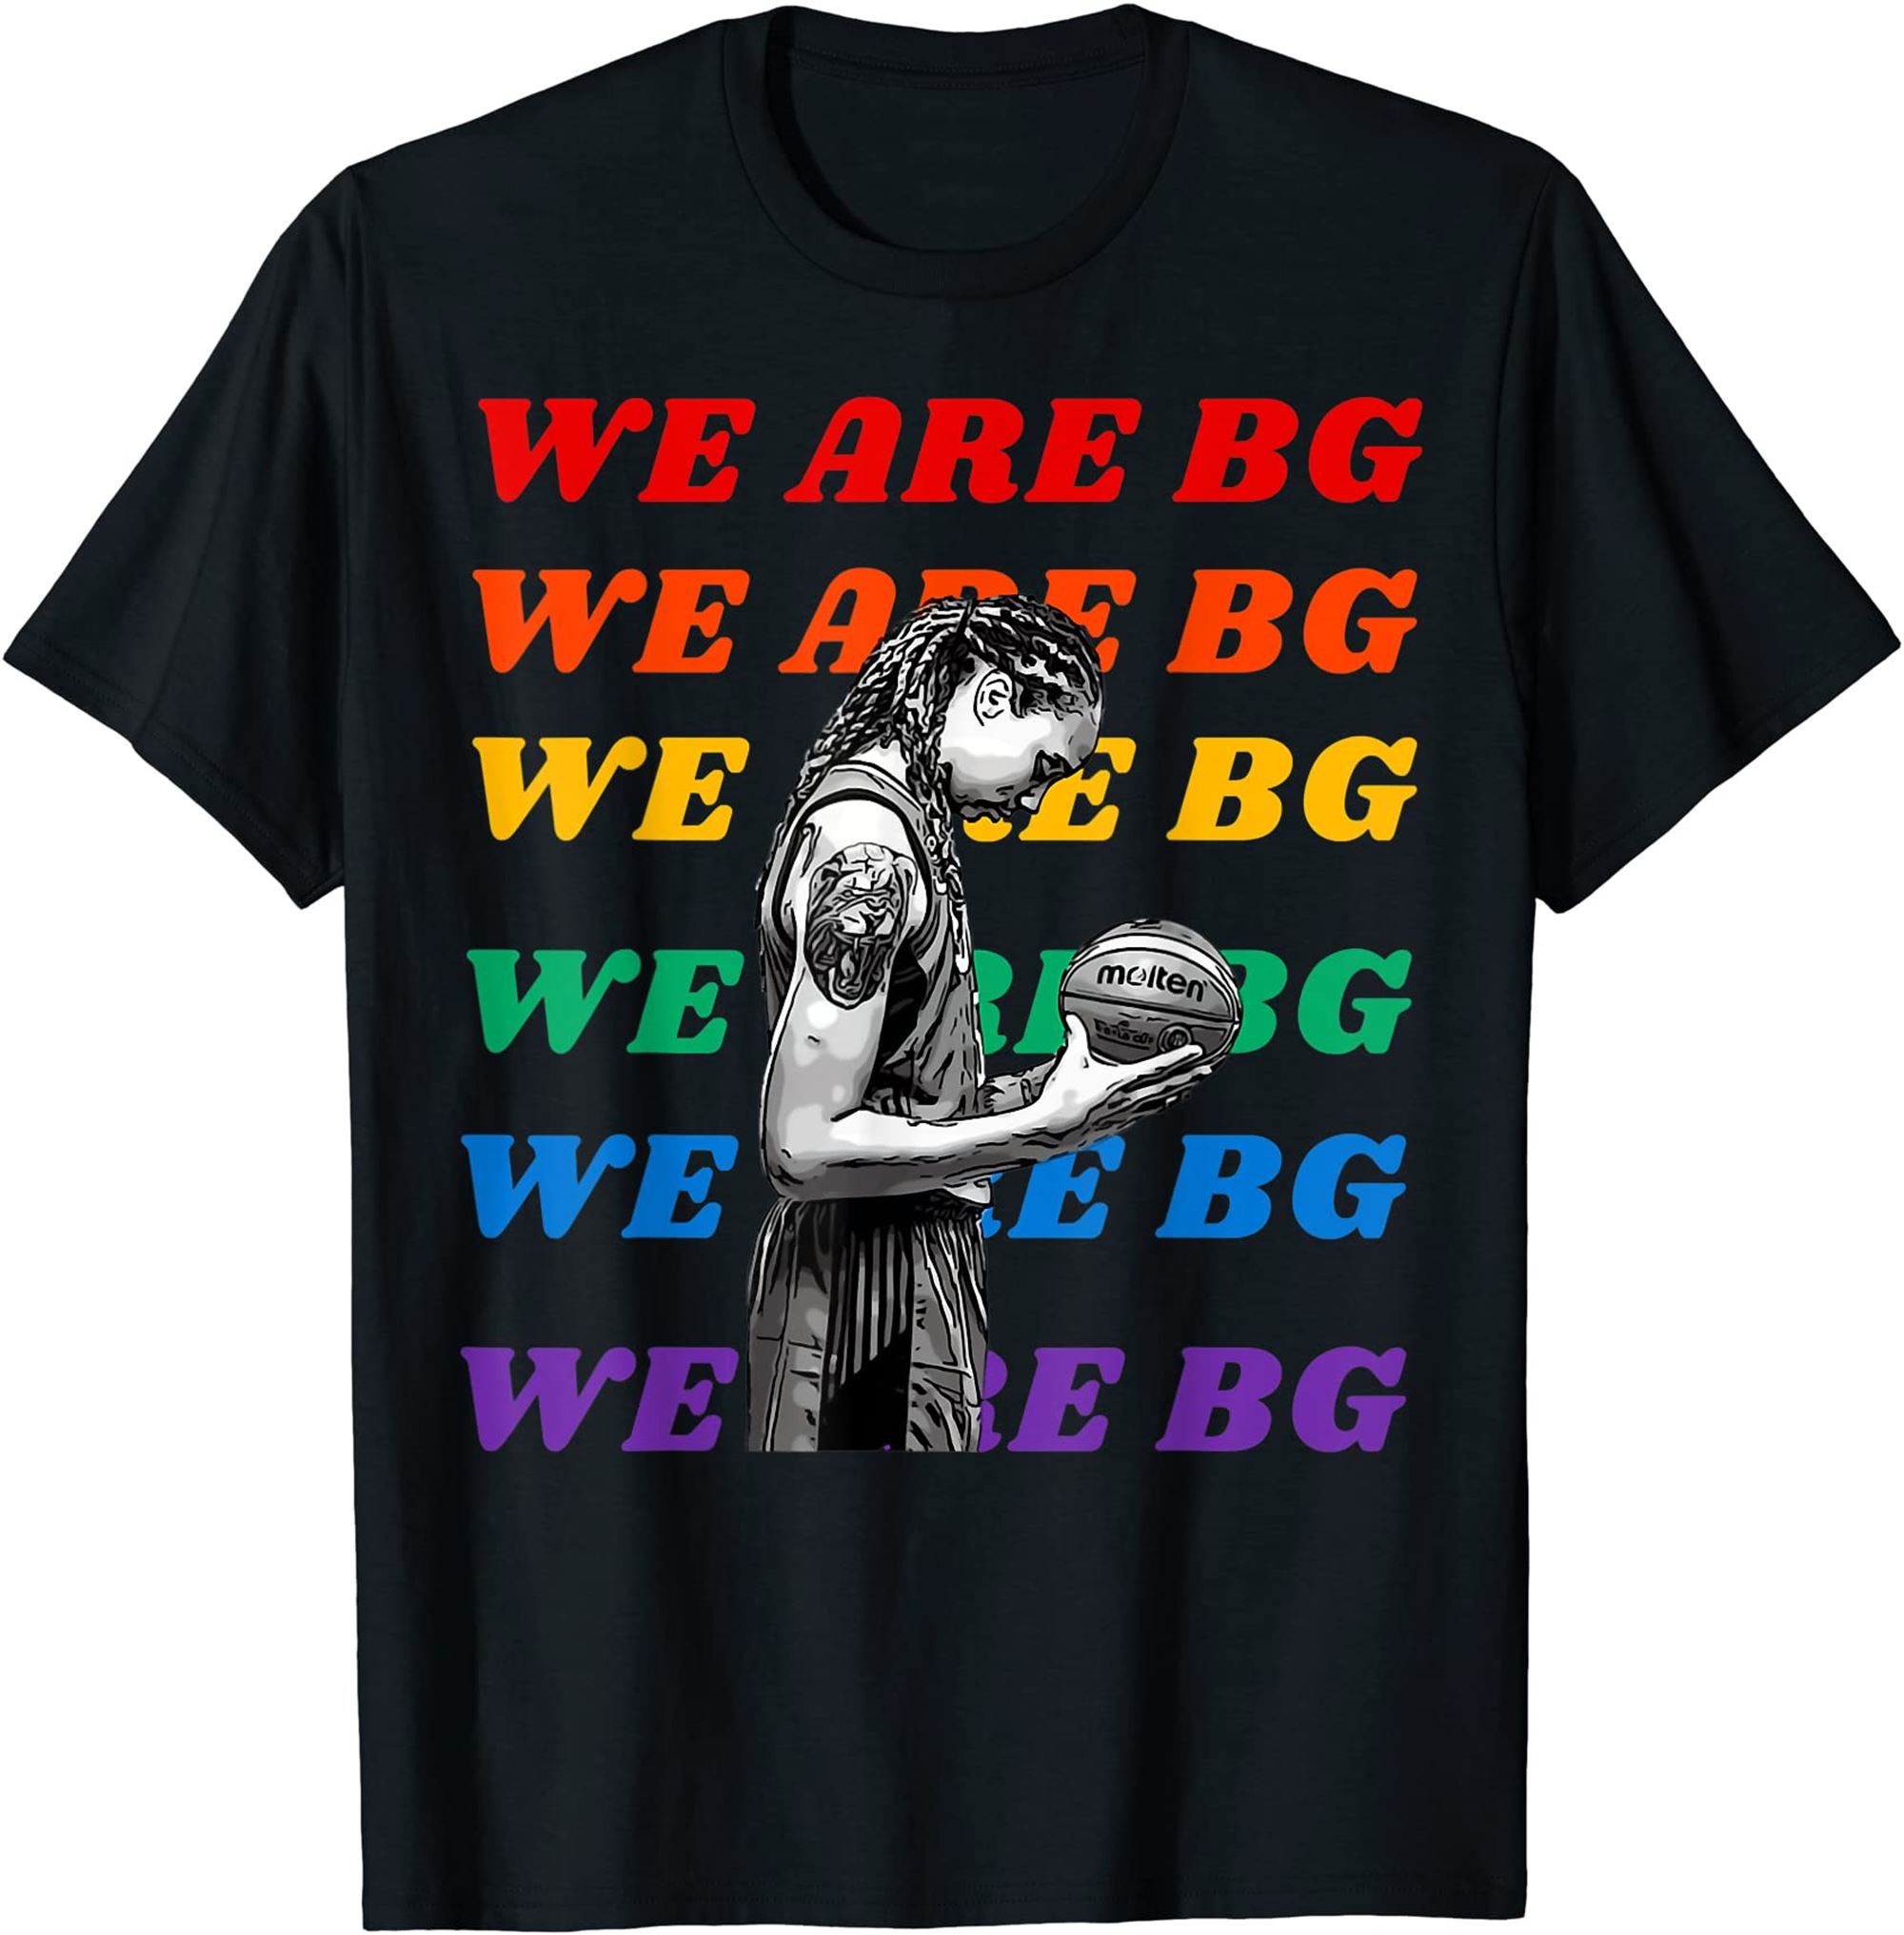 We Are Bg 42 T-shirt Size Up To 5xl